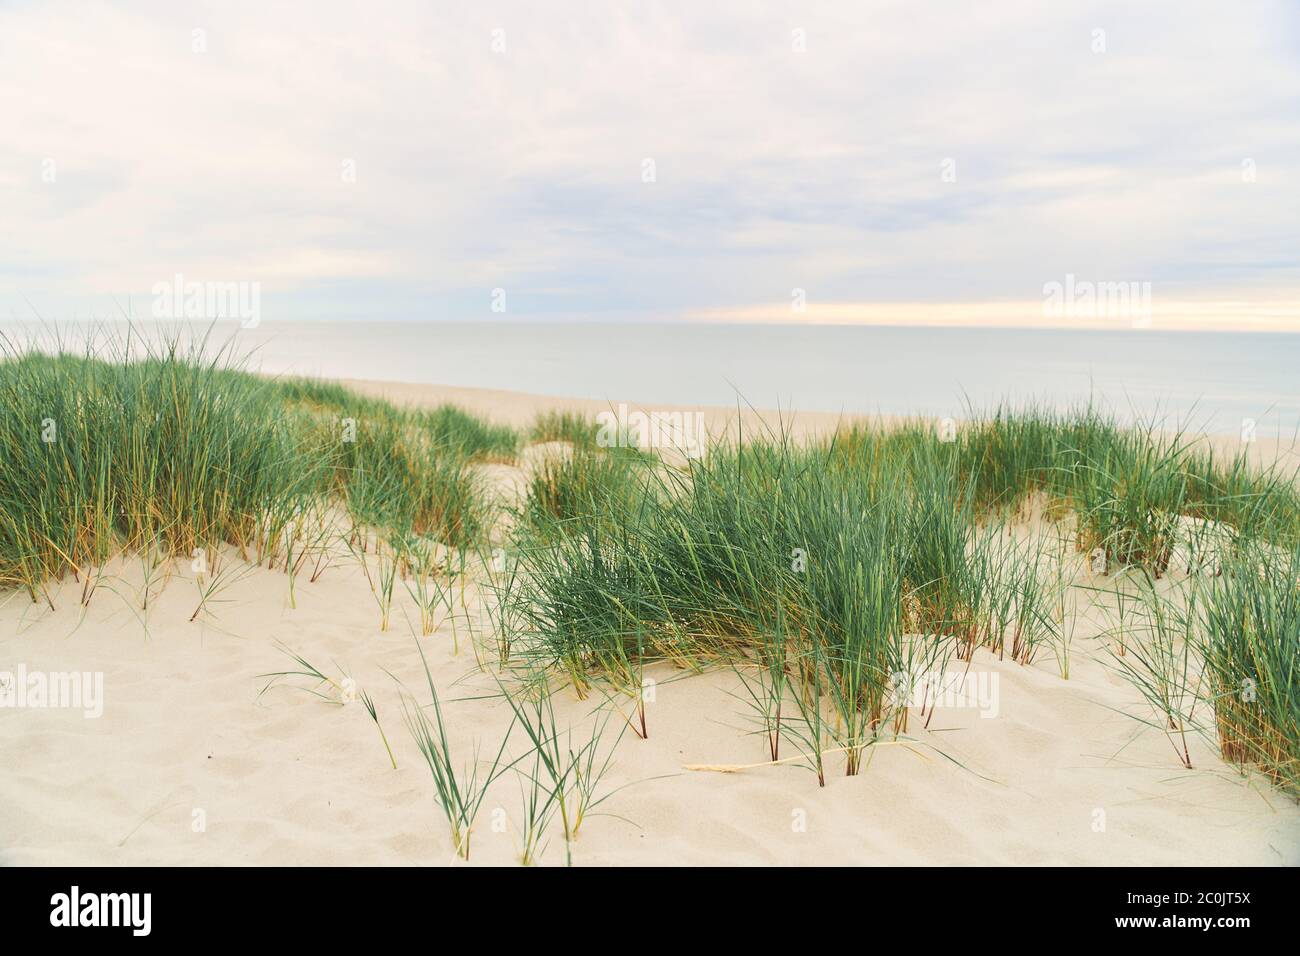 Baltic Sea. Beach in the village of Amber. Beach in Russia with a blue flag. Stock Photo